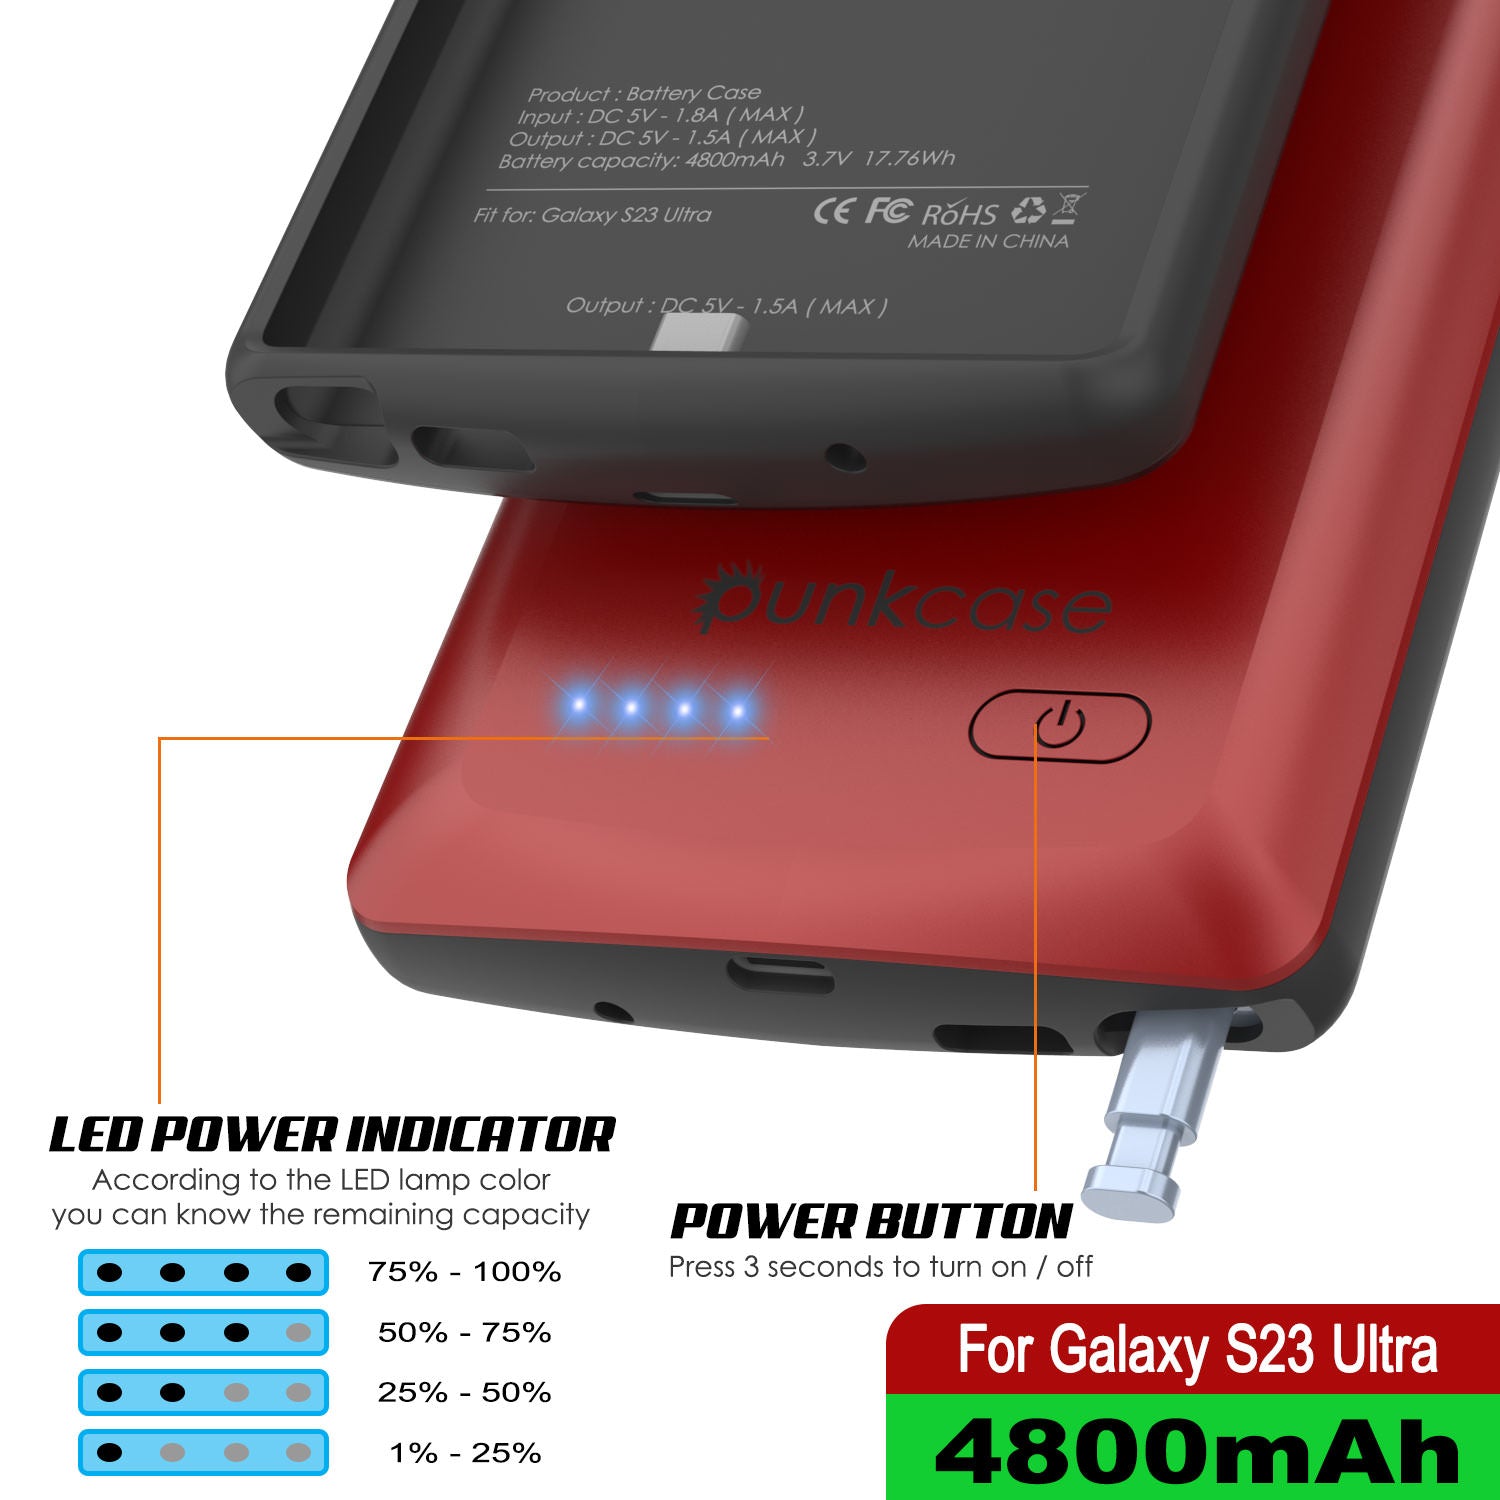 PunkJuice S24 Ultra Battery Case Red - Portable Charging Power Juice Bank with 4500mAh